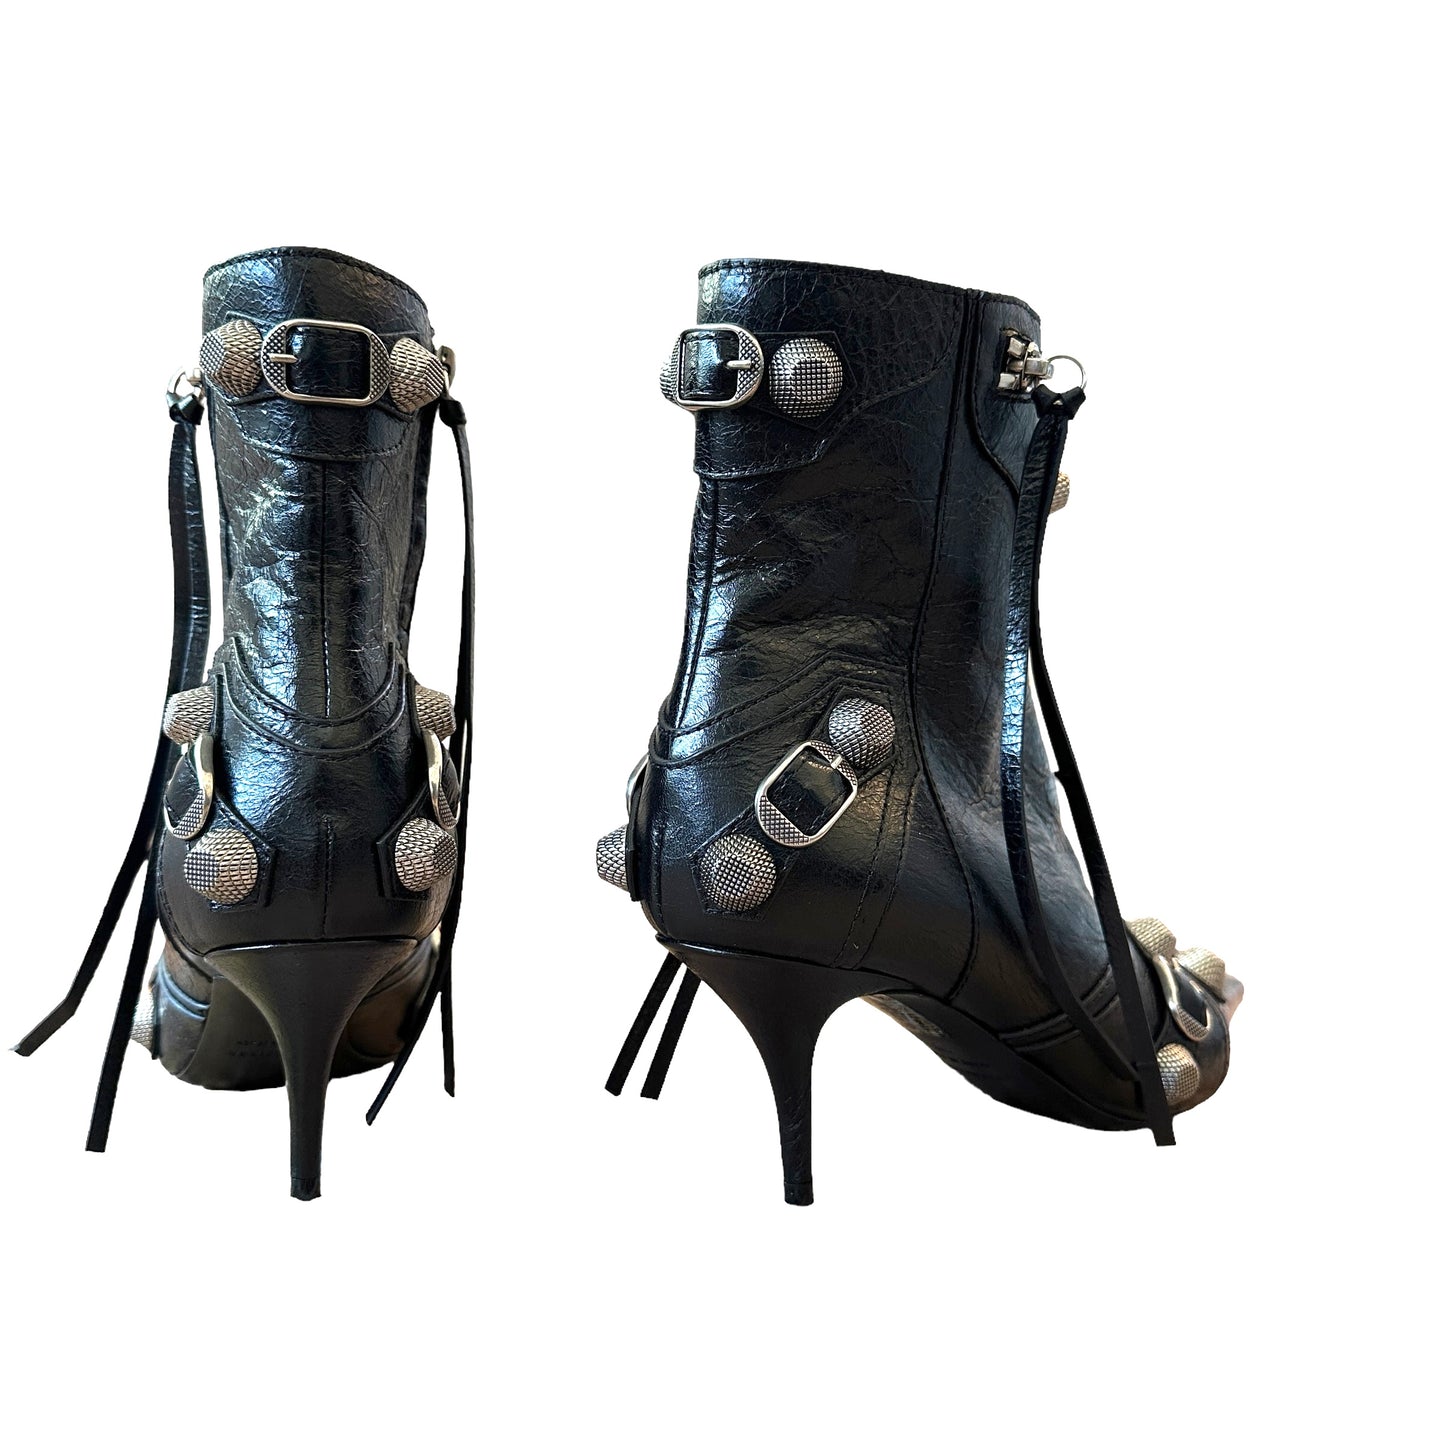 Cagole Leather Studded Boots - 7